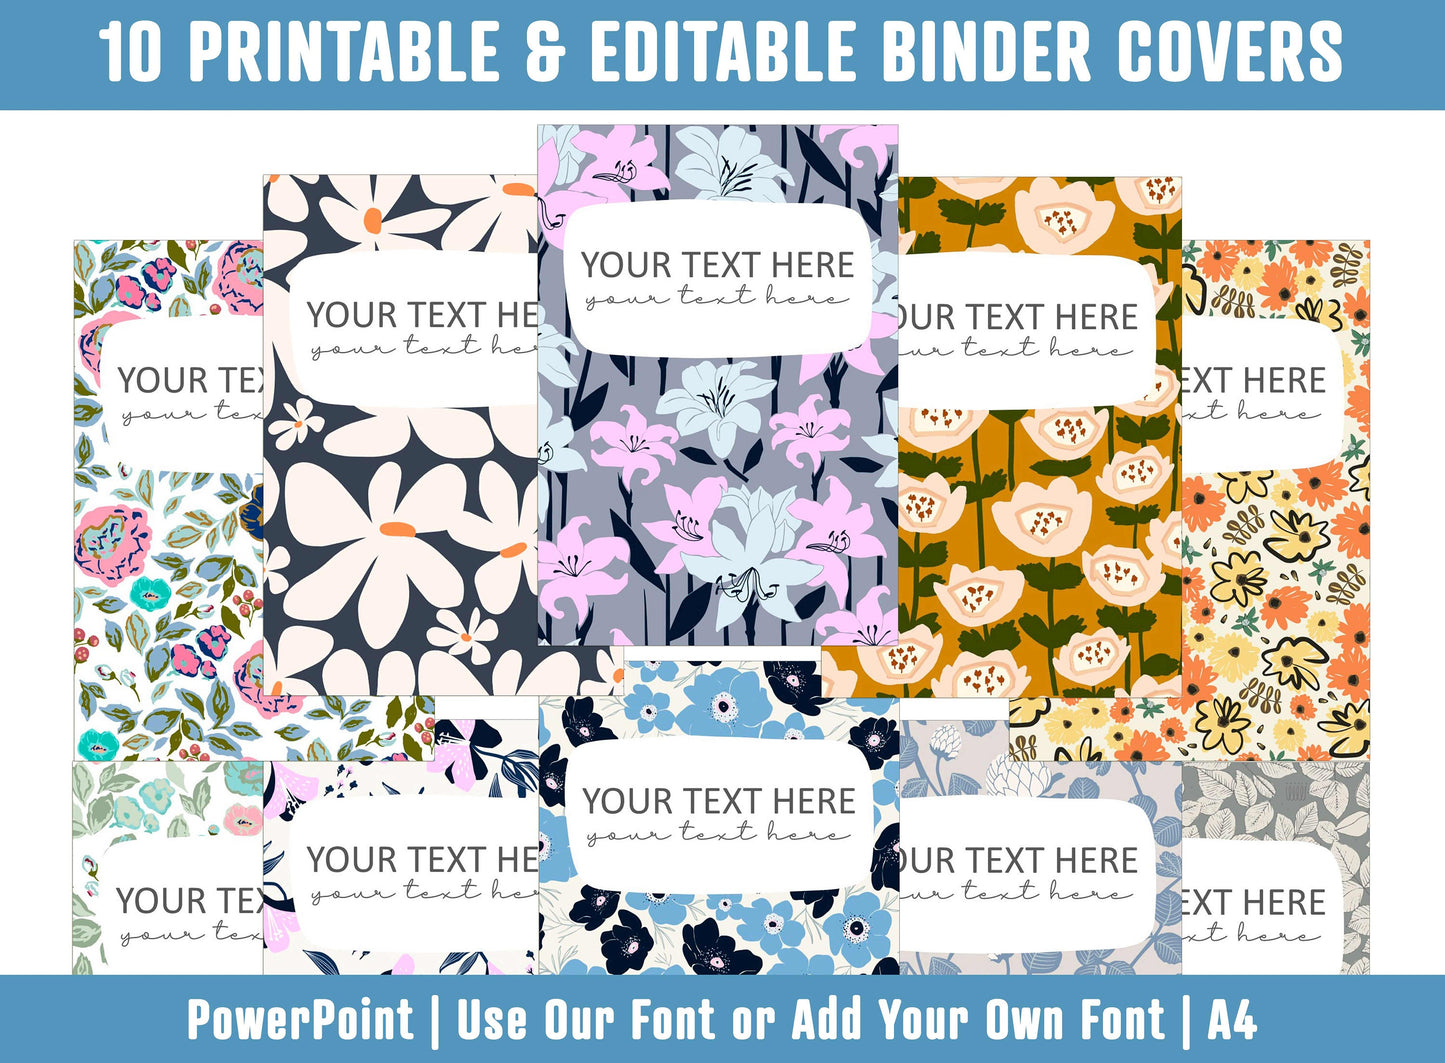 PowerPoint Binder Covers, 10 Printable/Editable Flower Botanical Covers+Spines, Binder/Planner Inserts for Teacher, Student, Home School